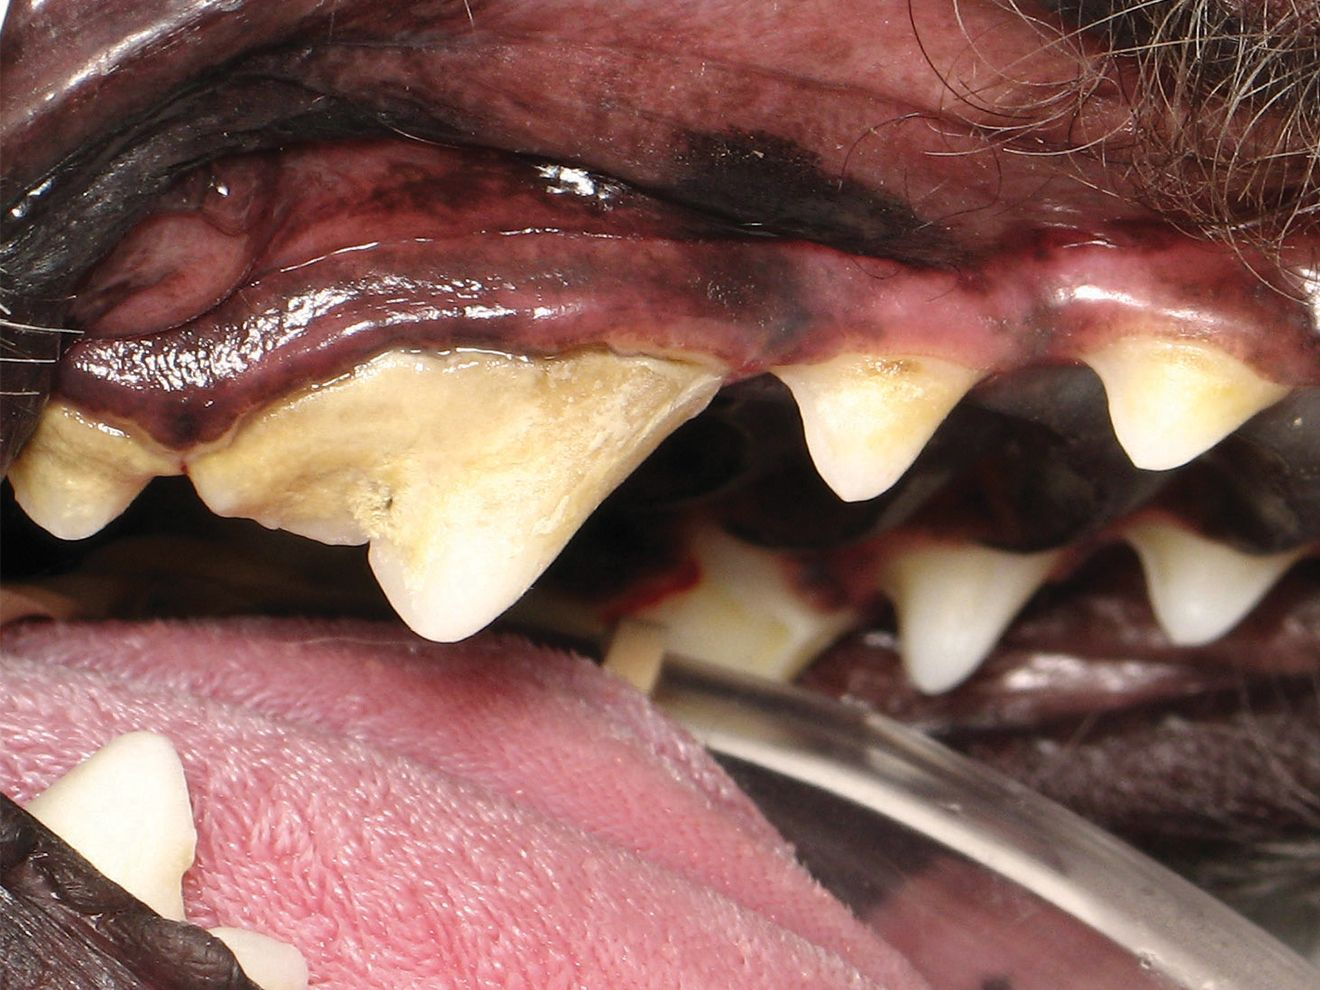 Stage 2 of canine dental disease